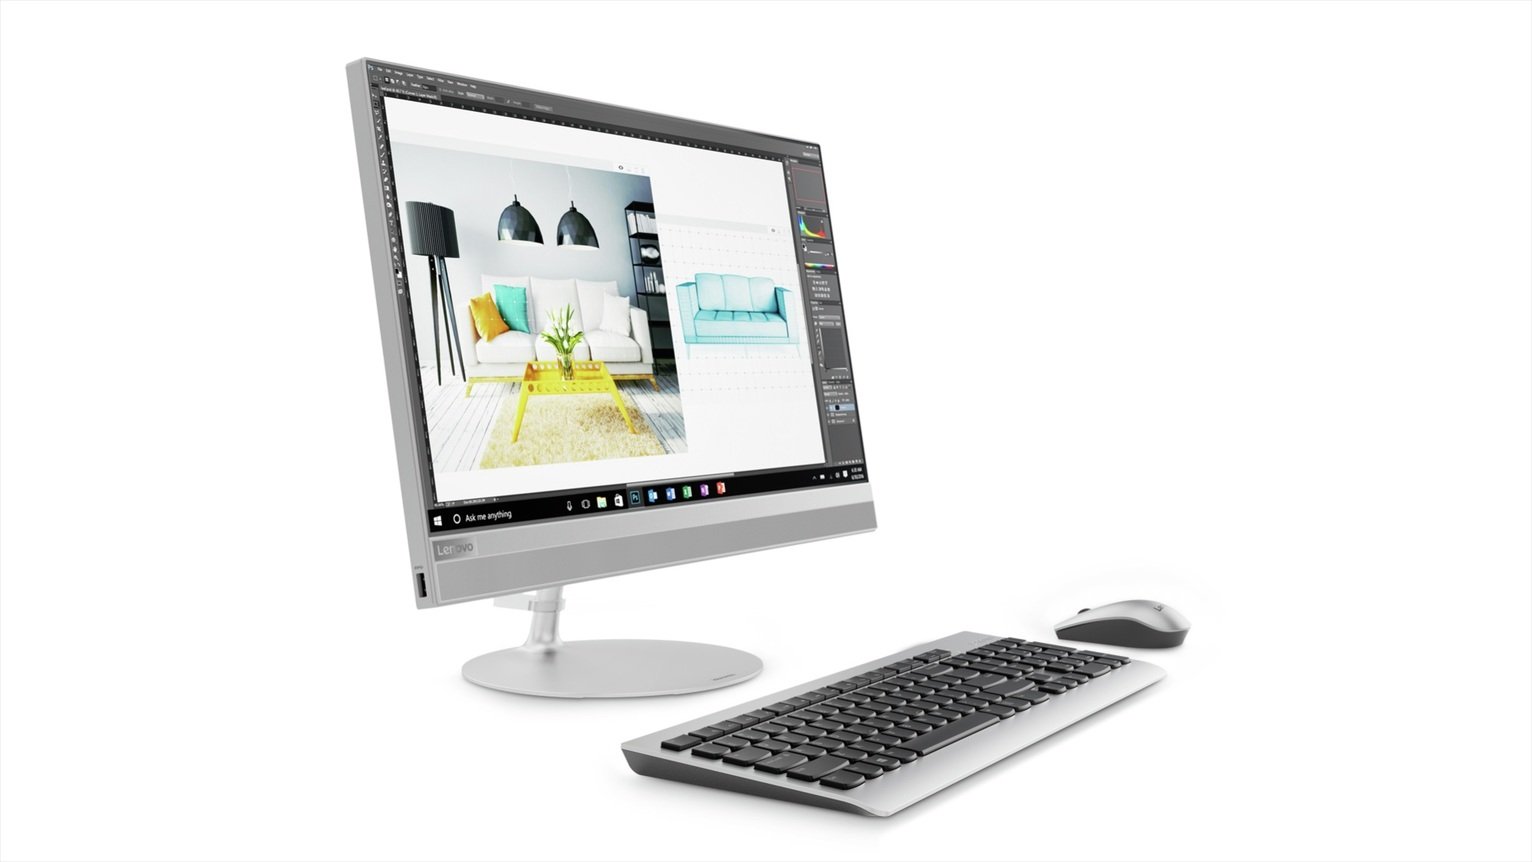 Lenovo IdeaCentre 520 22 Inch i3 8GB 1TB All-in-One PC review